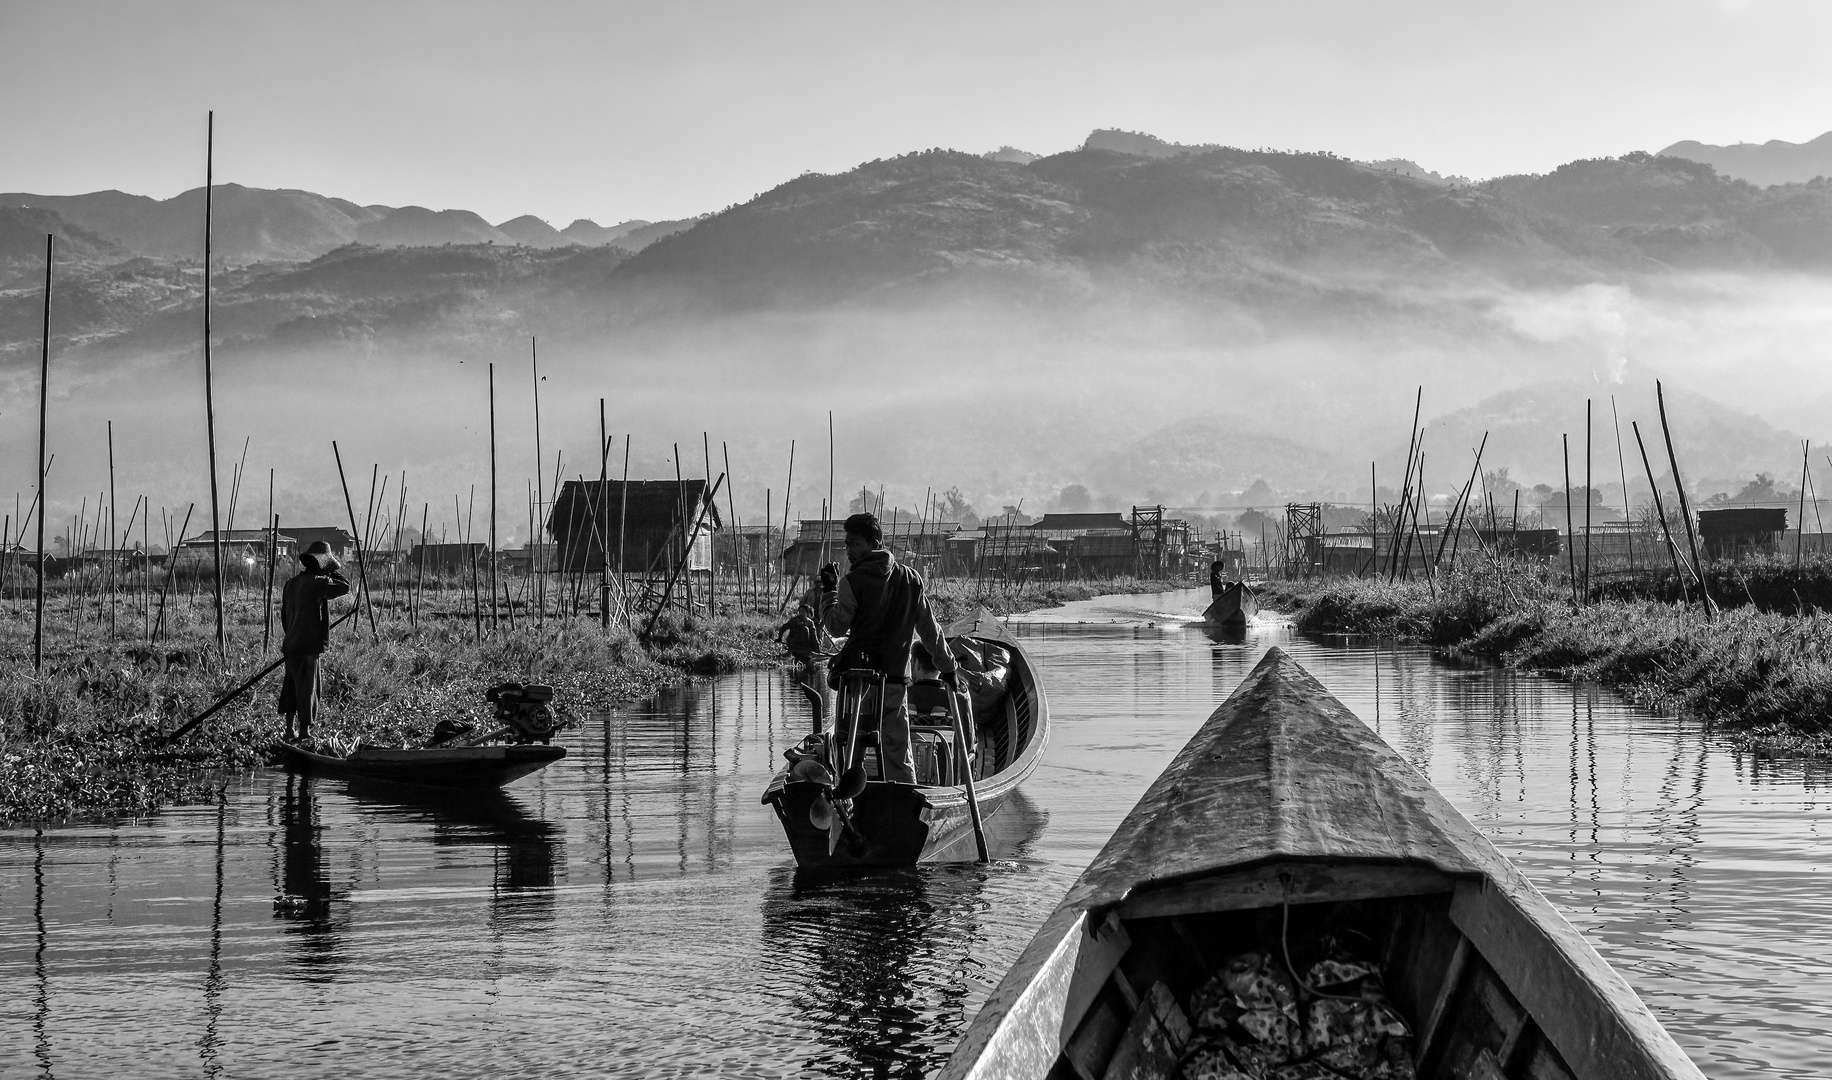 Morgens am Inle-See